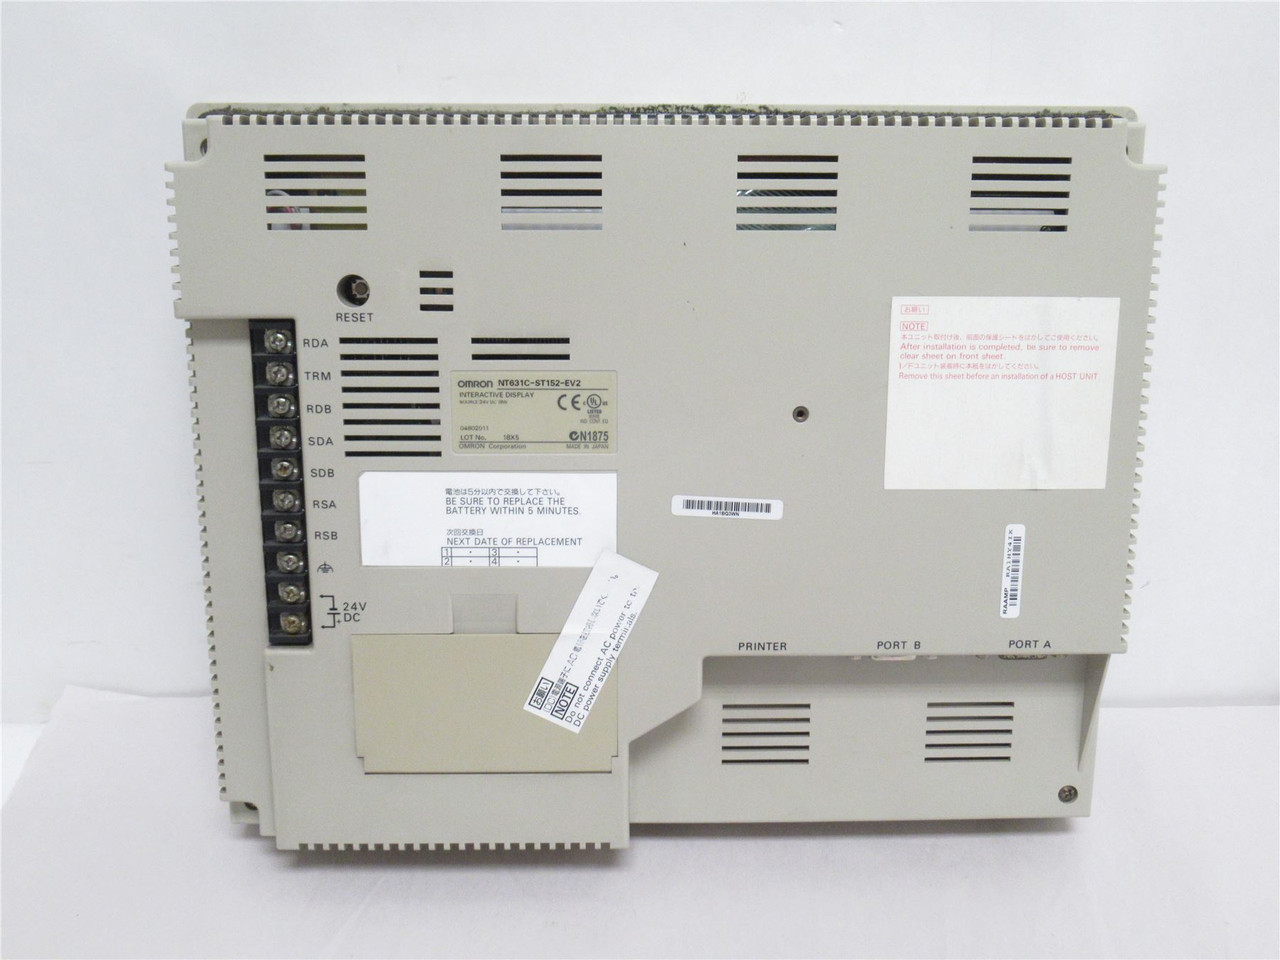 Omron NT631C-ST152-EV2; Operator Interface Touch Panel 24VDC; 10.4"